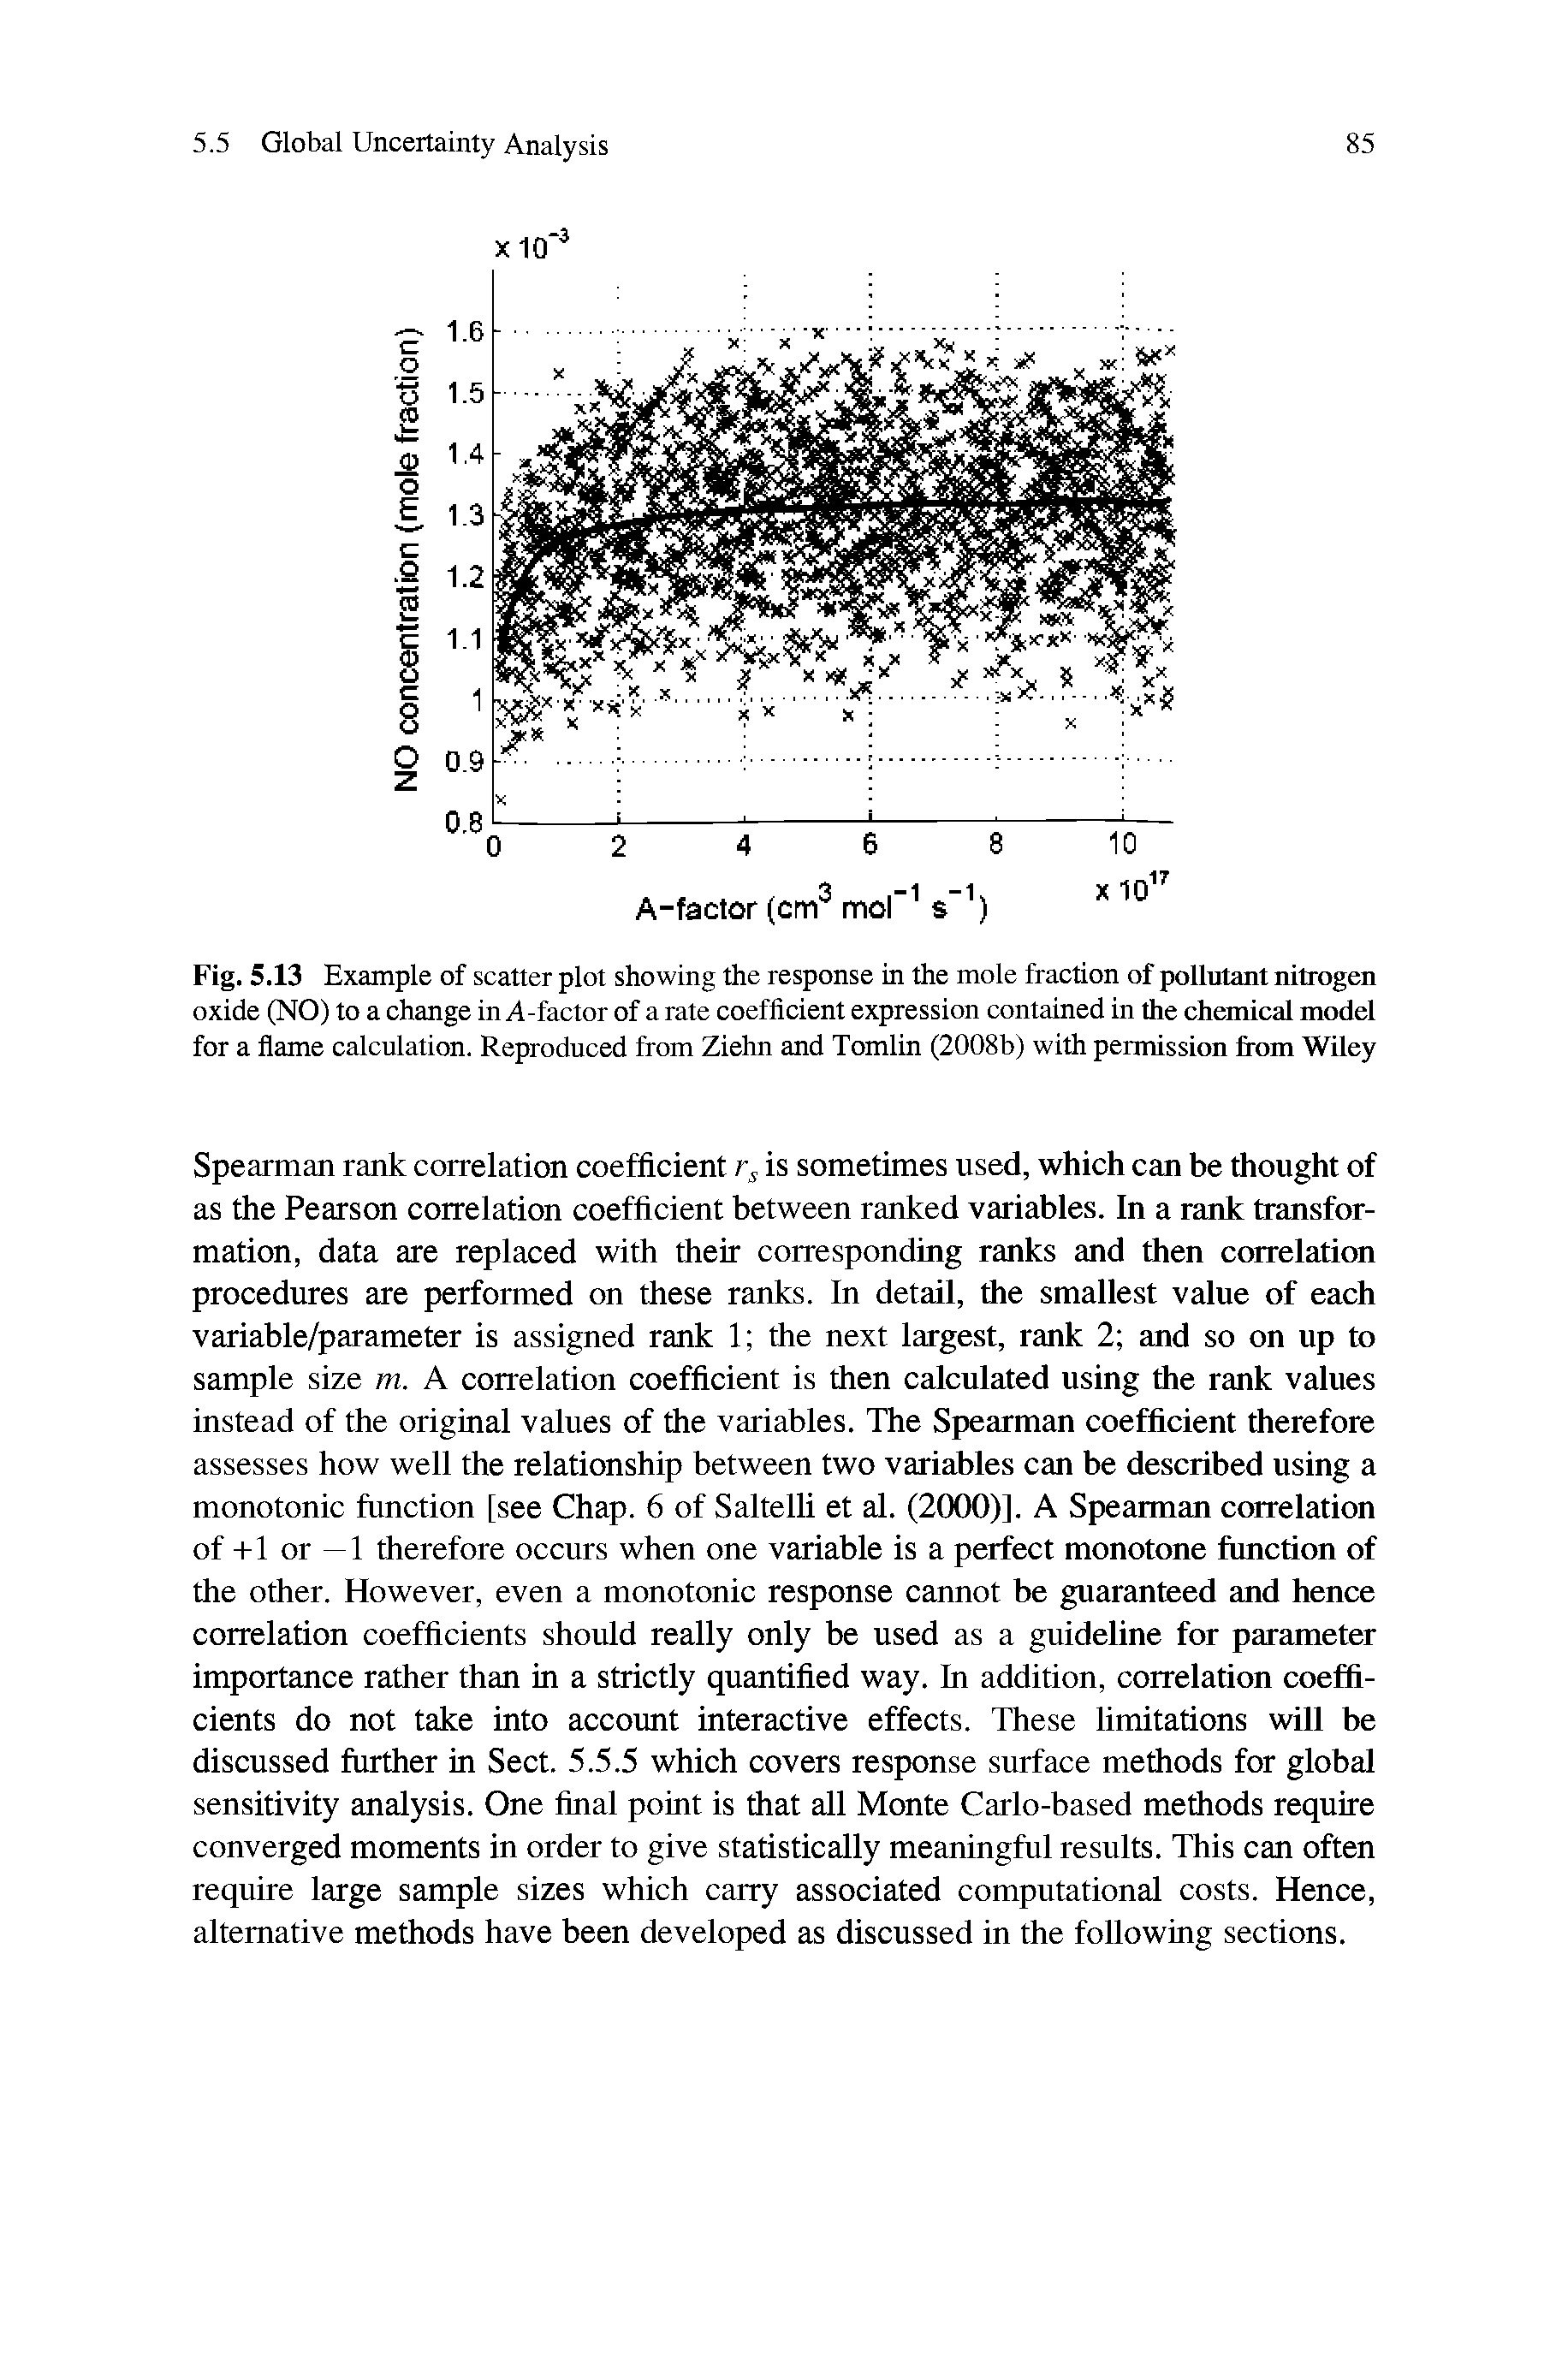 Fig. 5.13 Example of scatter plot showing the response in the mole fraction of pollutant nitrogen oxide (NO) to a change in A-factor of a rate coefficient expression contained in the chemical model for a flame calculation. Reproduced from Ziehn and Tomlin (2008b) with permission from Wiley...